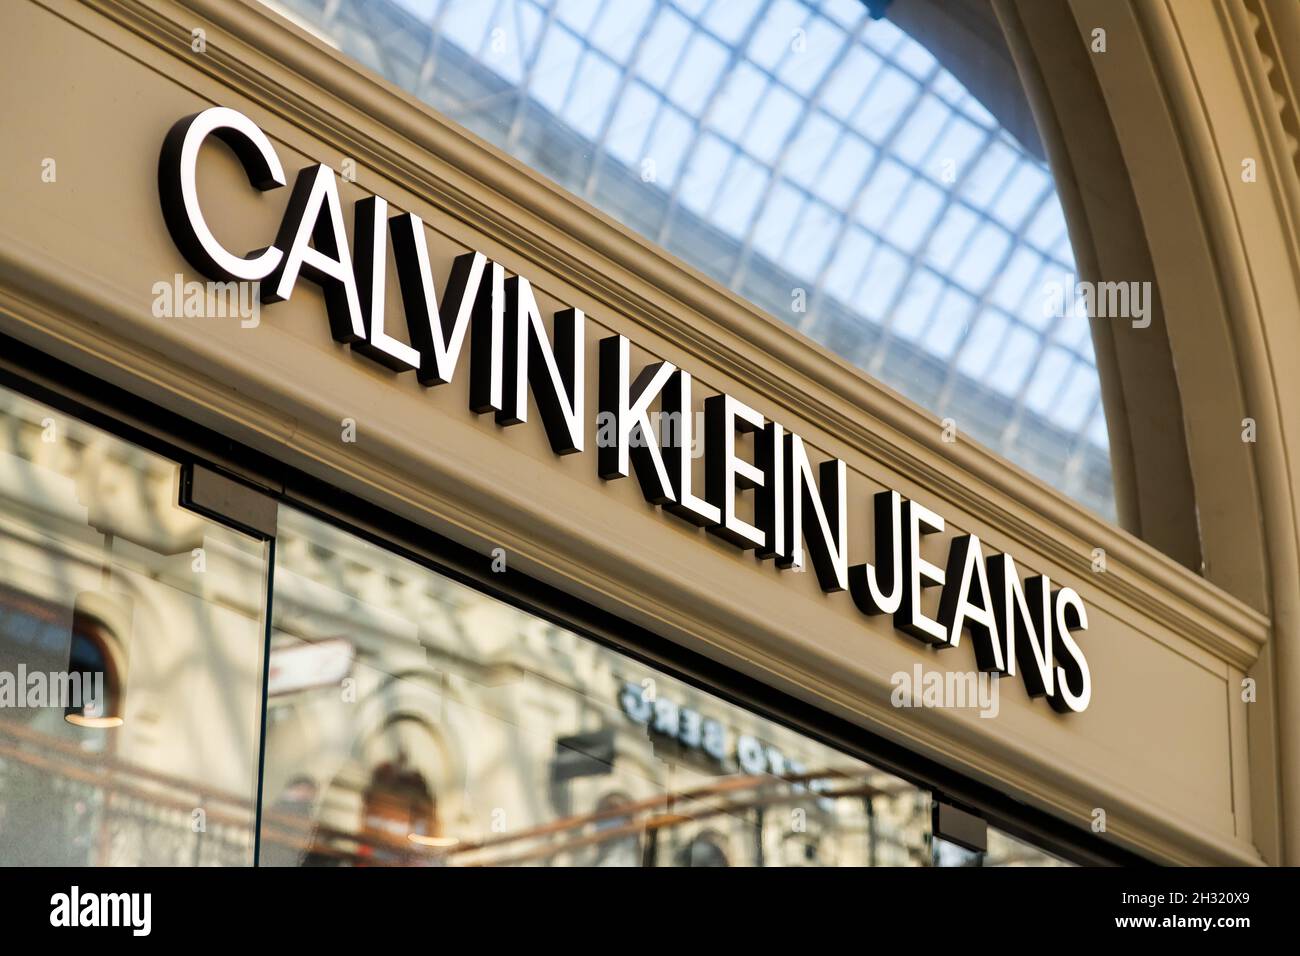 Moscow, Russia - October 14, 2021: Signboard of Calvin Klein Jeans  store. CK boutique in GUM Stock Photo